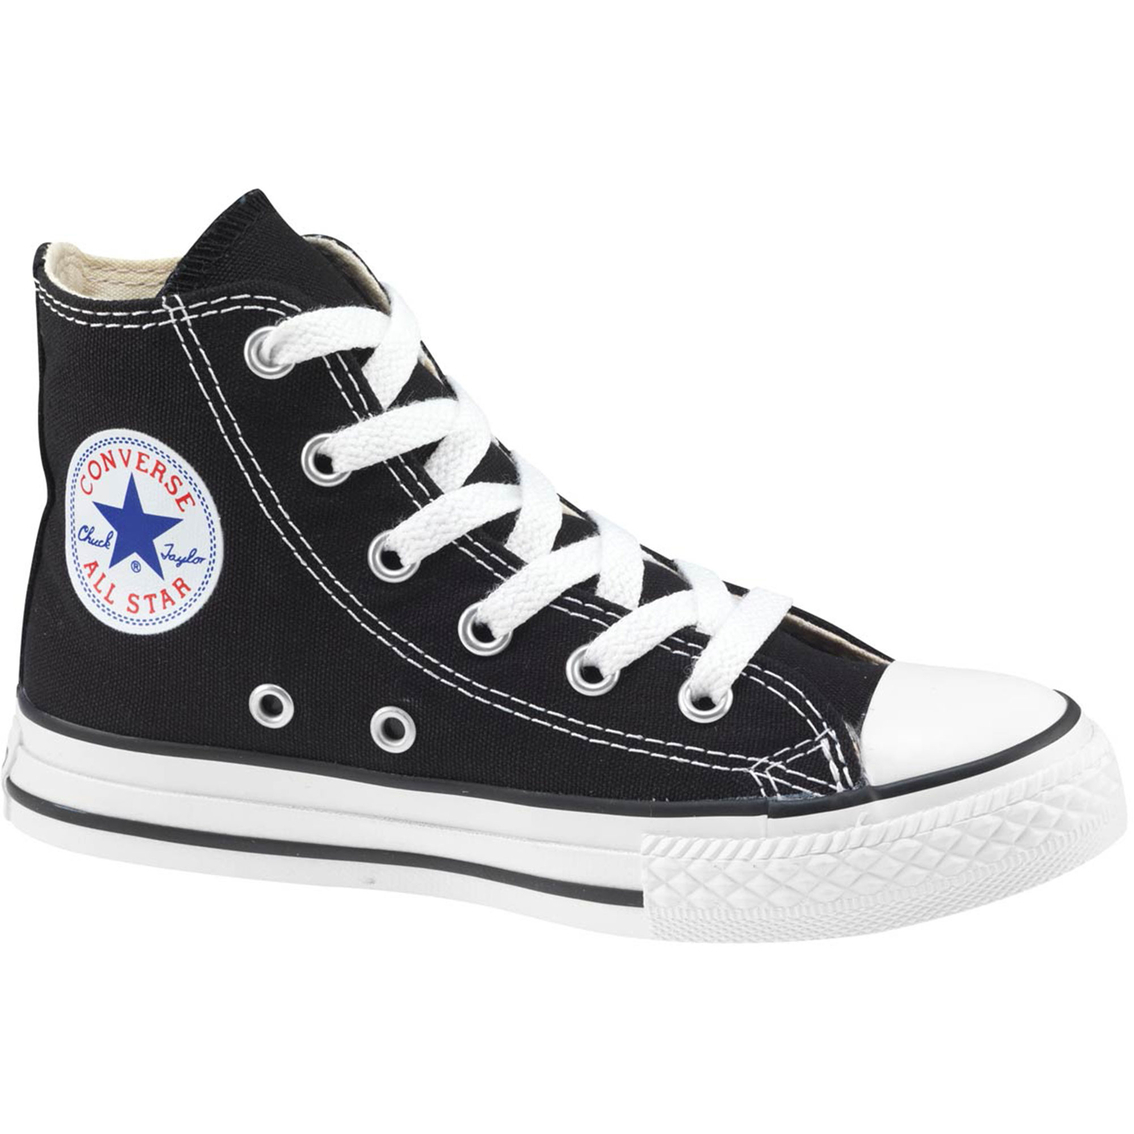 Boys All Black Converse Outlet, SAVE 59% 